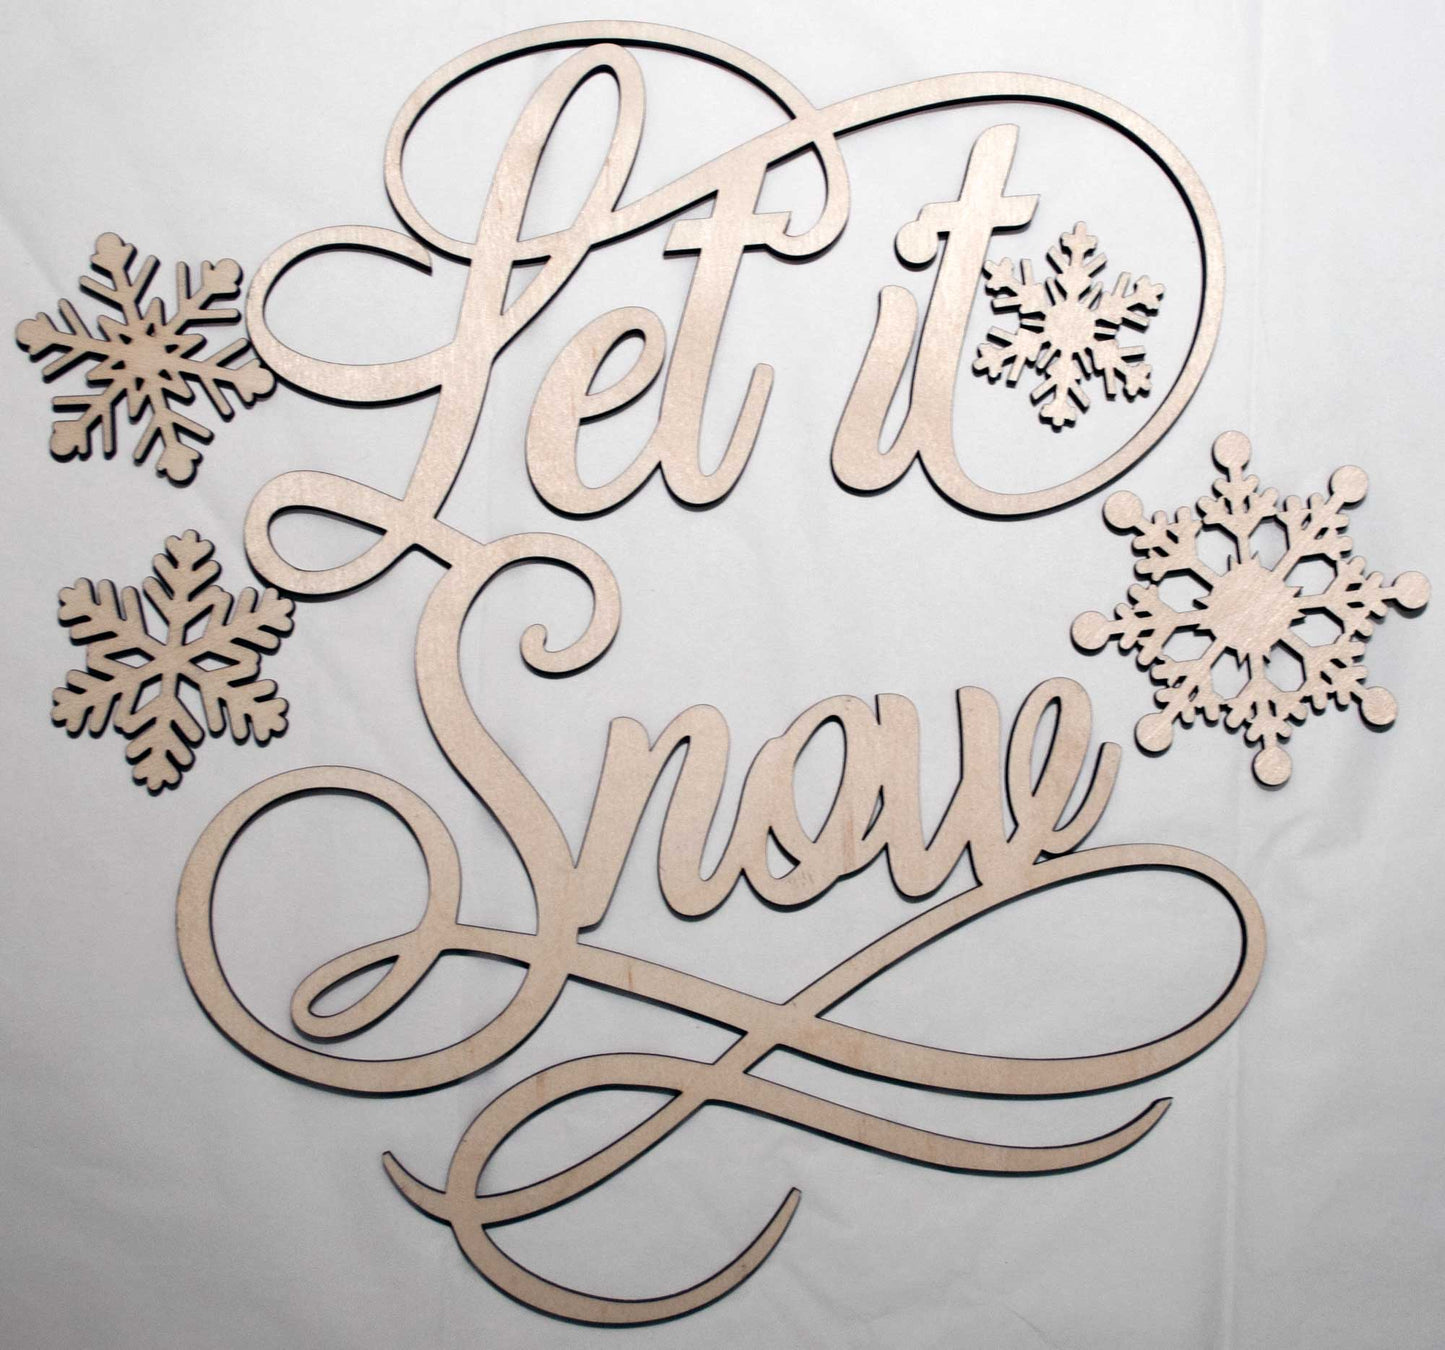 Let it Snow with Snow flakes - Bucktooth Designs